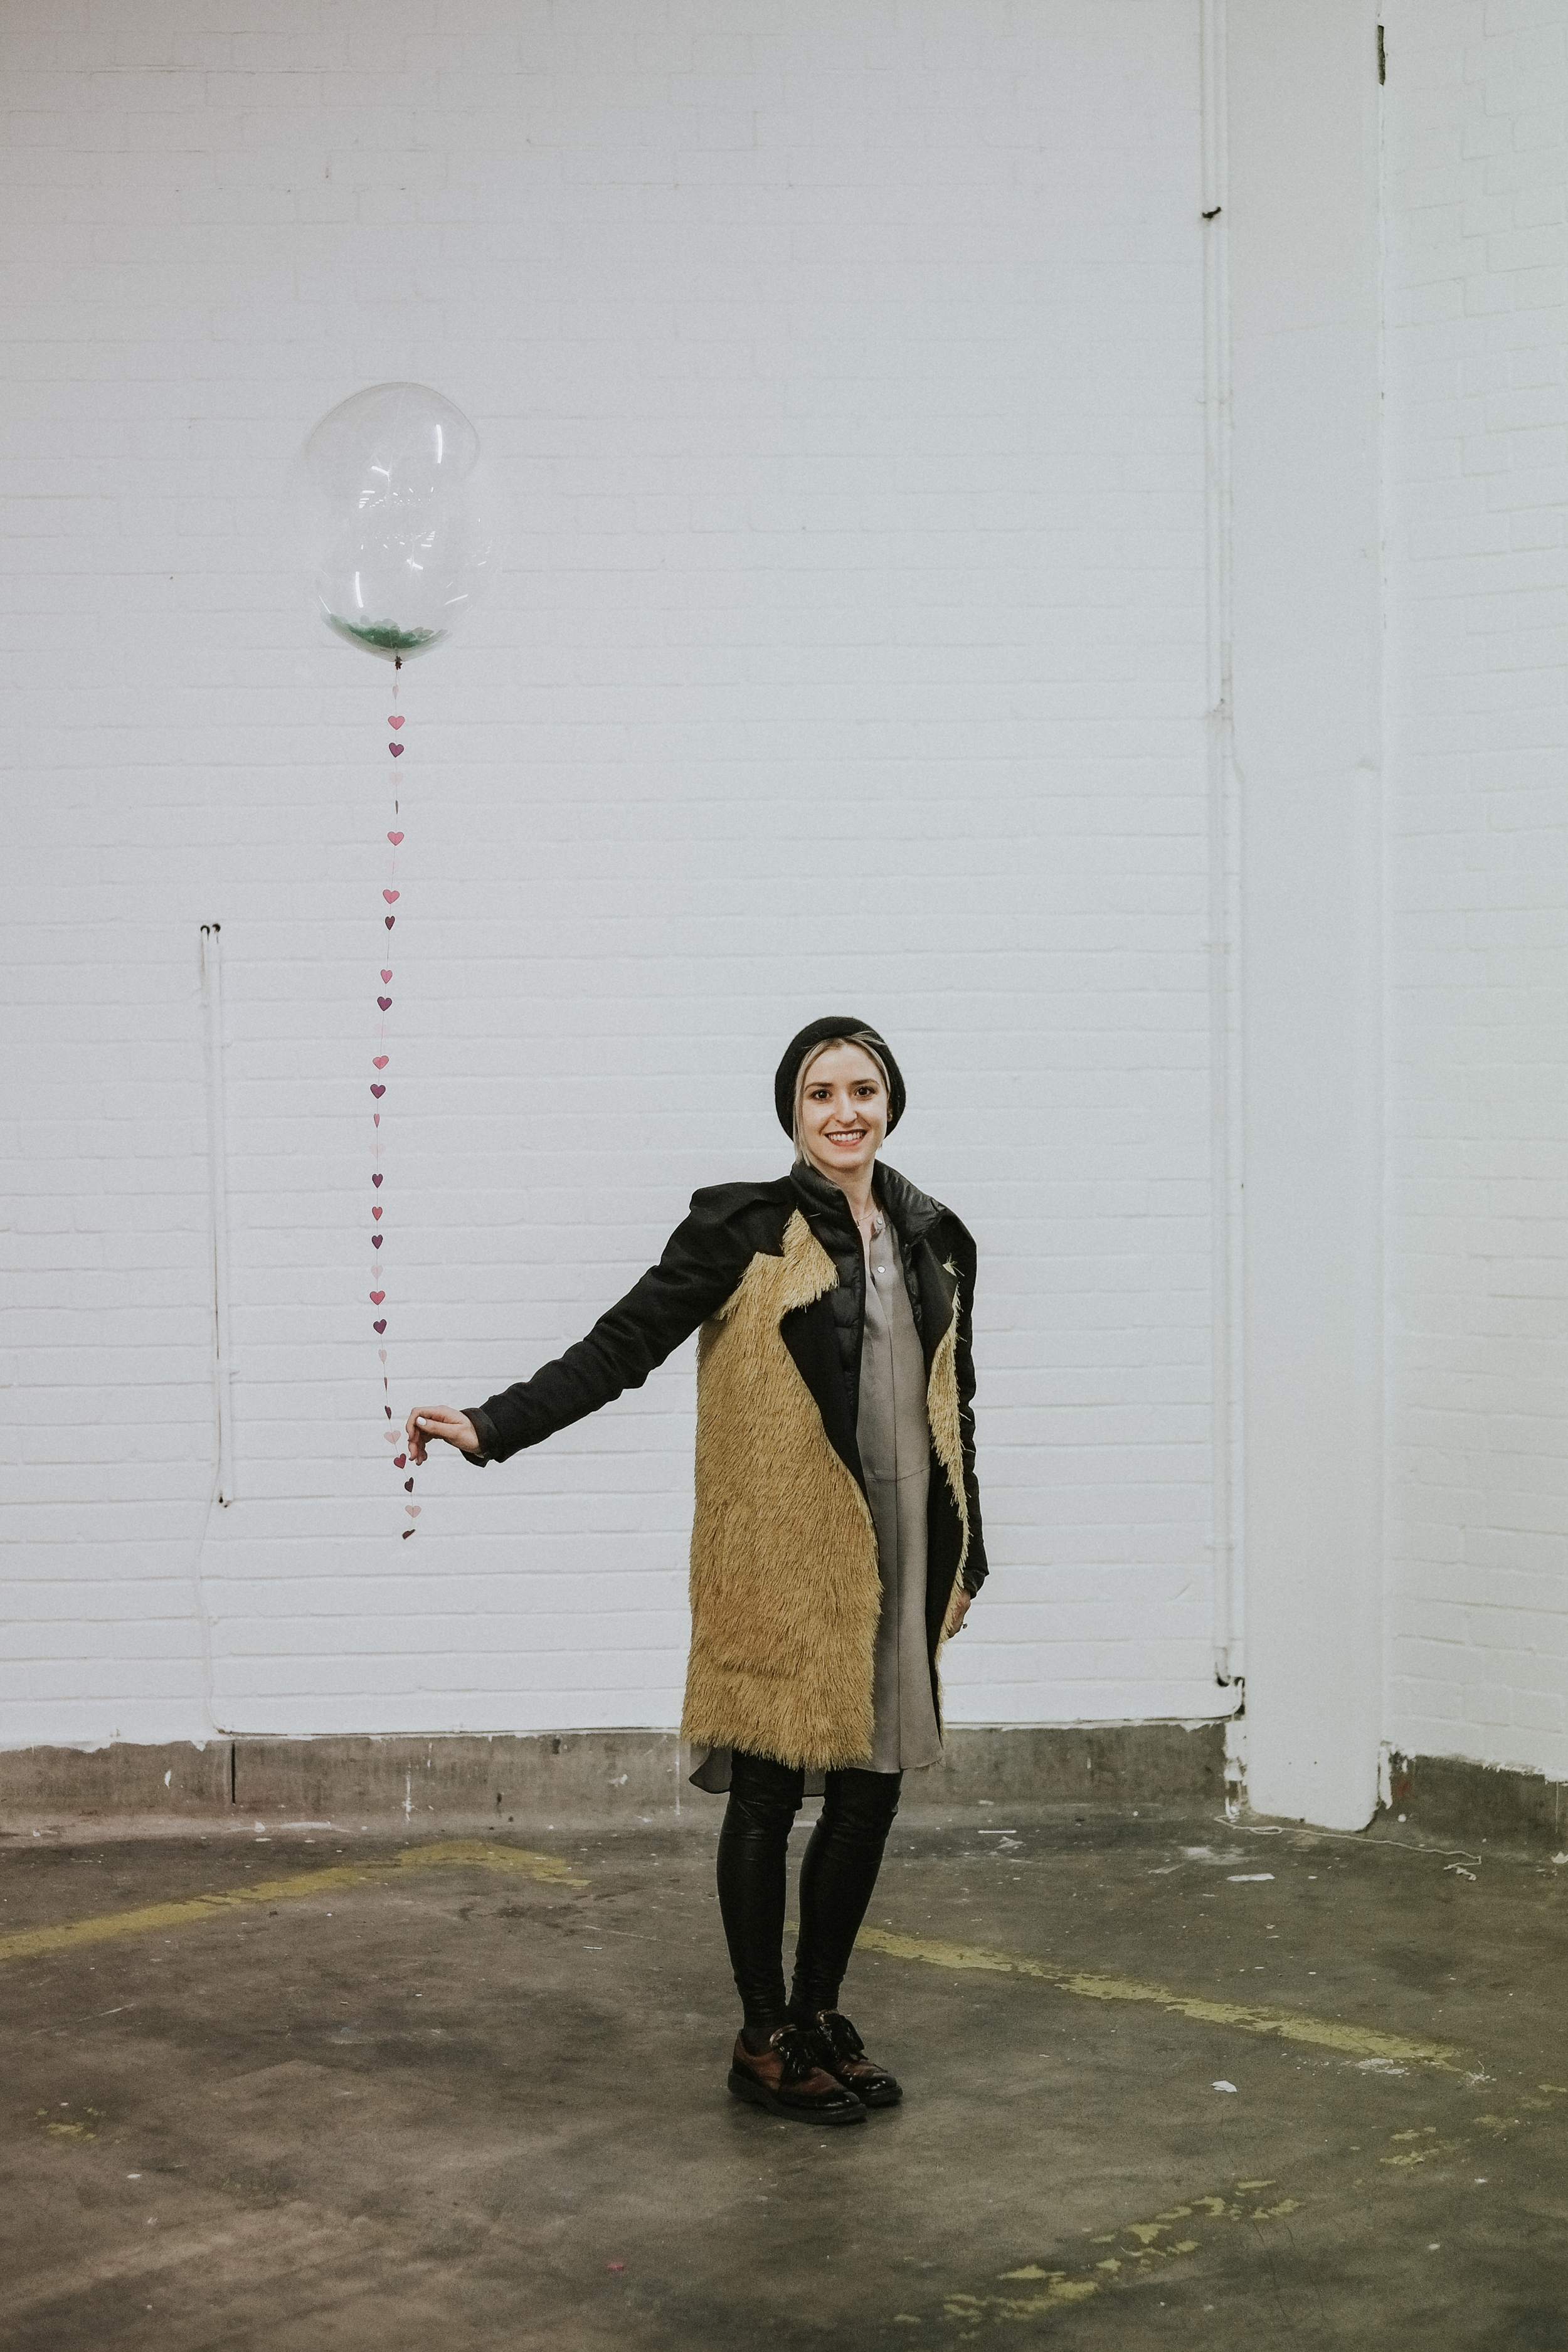  Here's  Dana Dallal Bridal &nbsp;with a pretty  Pop Pop Papier &nbsp;balloon that is almost bigger than her.&nbsp;Dana was one of my stand neighbours during the show. Her work is incredible and she is a beautiful person inside and out. I can't wait 